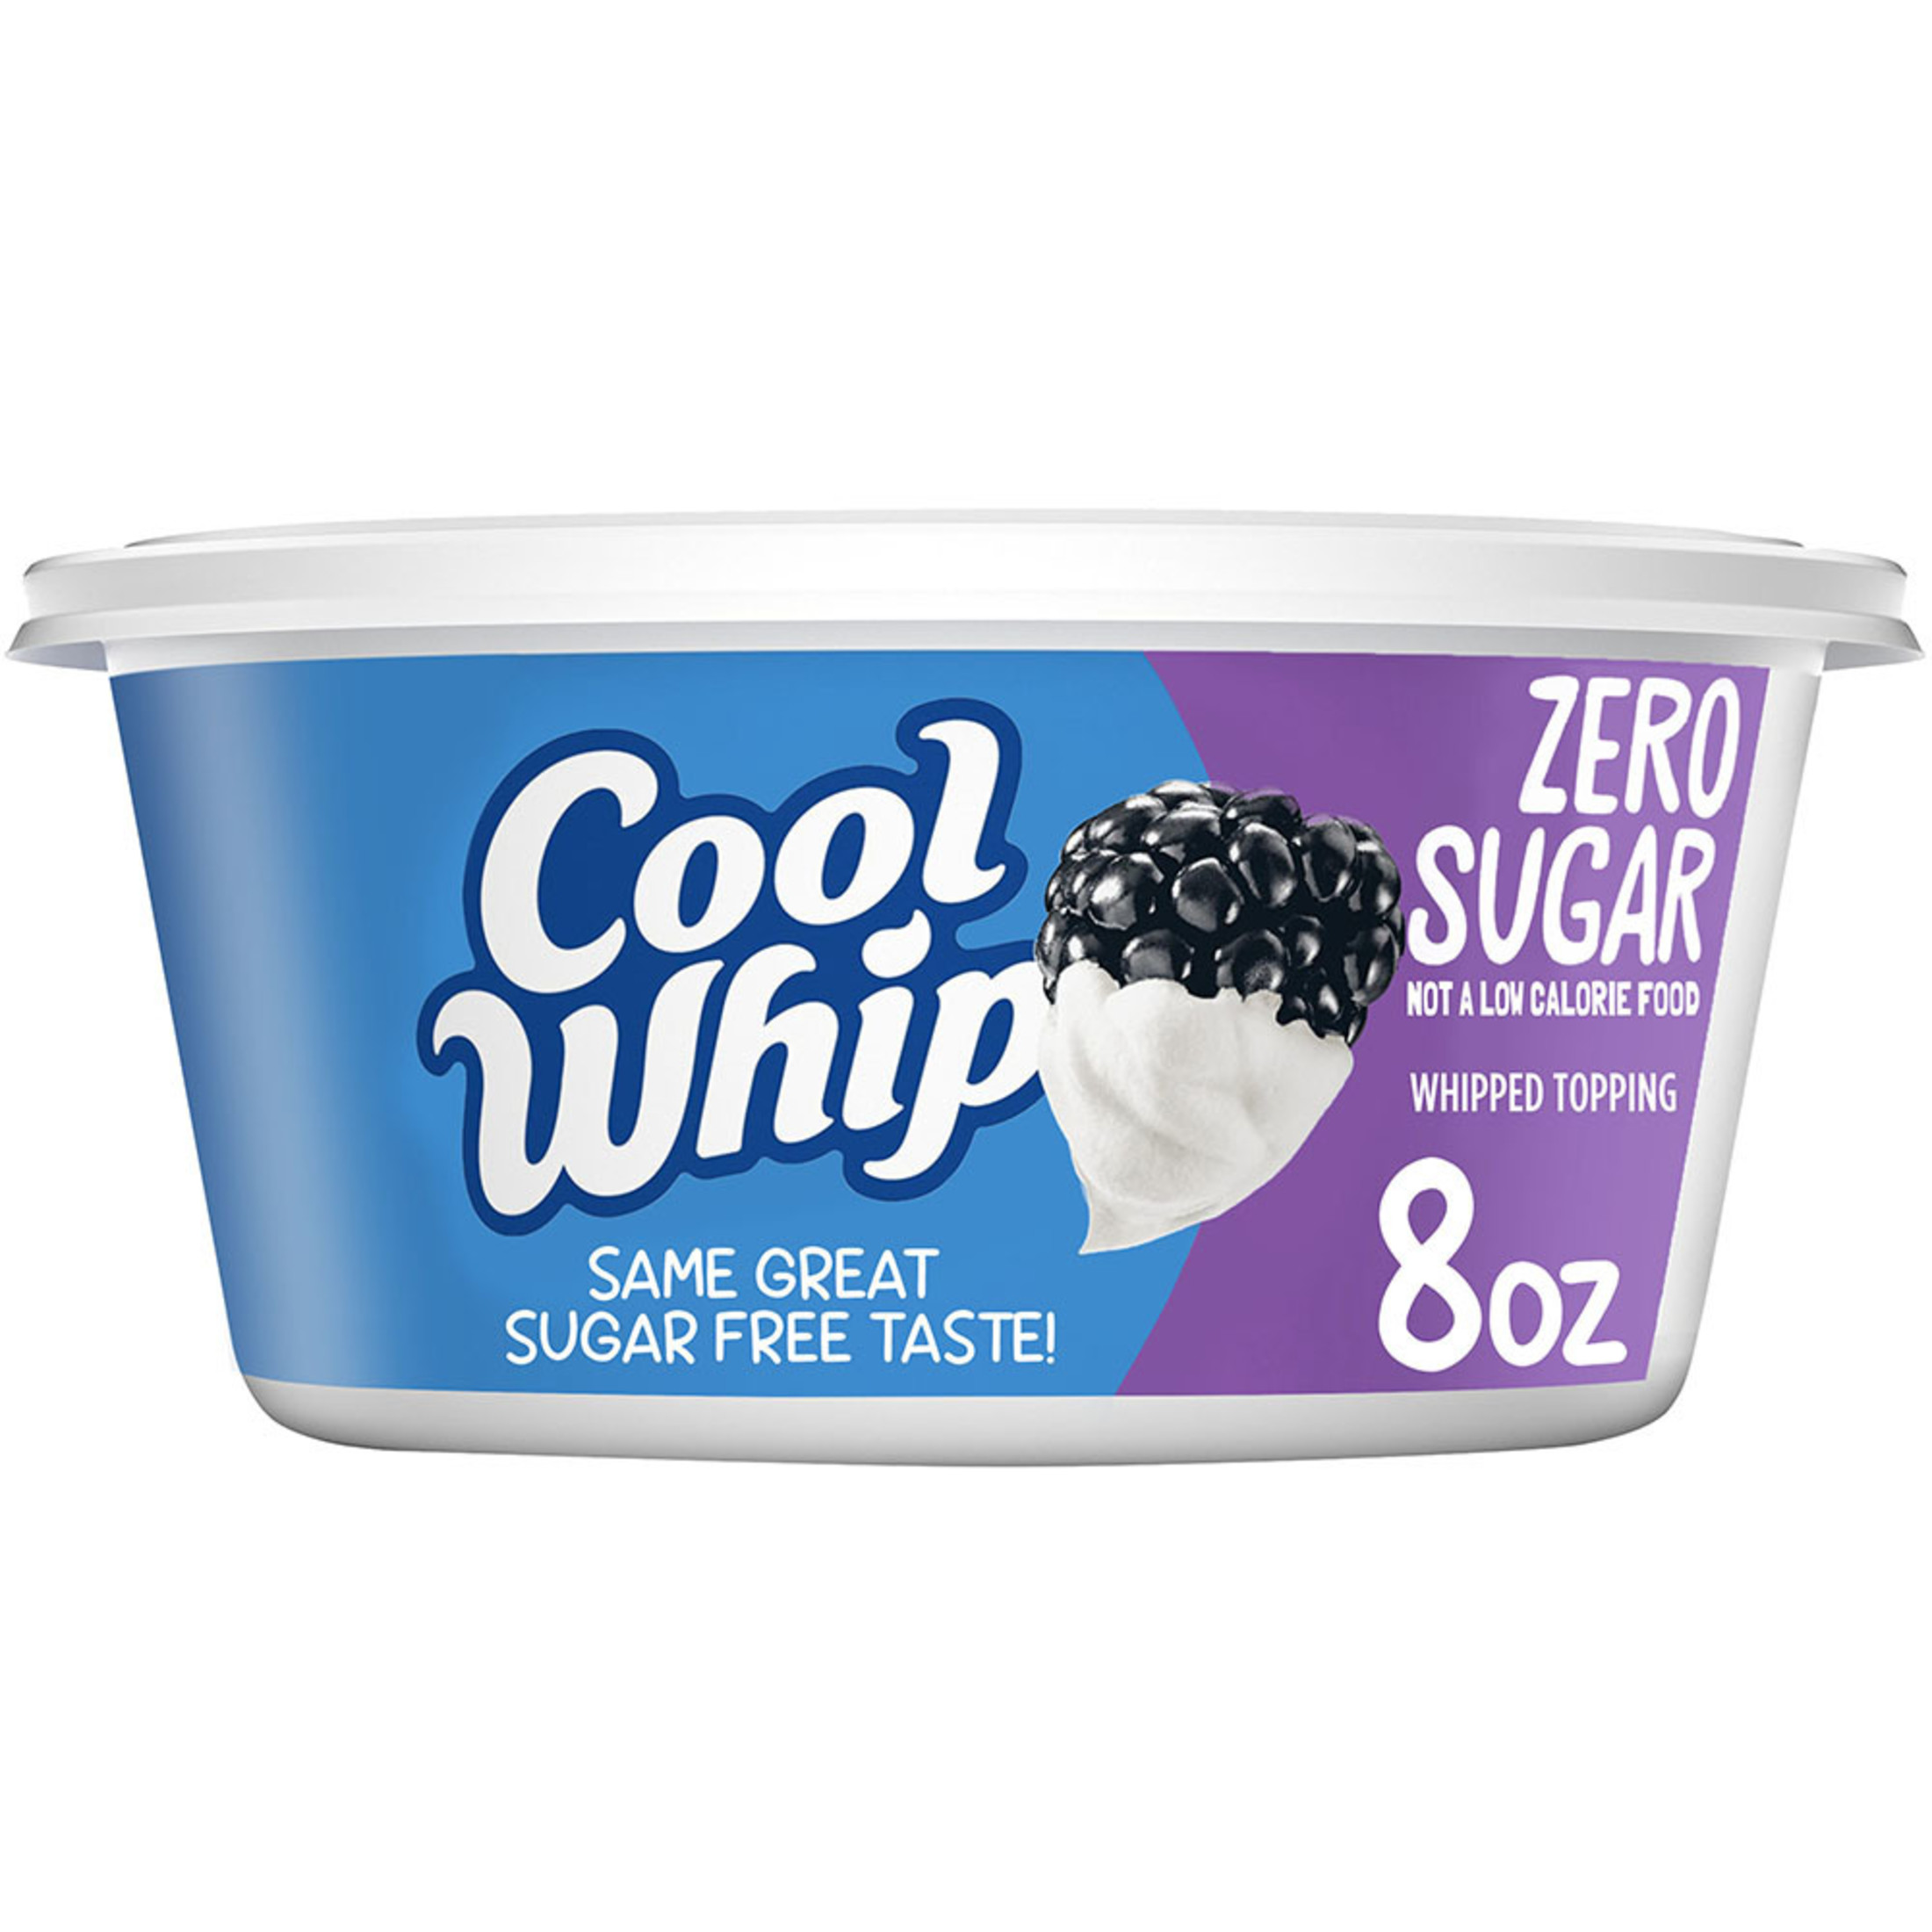 Cool Whip Zero Sugar Whipped Cream Topping, 8 oz Tub - image 1 of 11